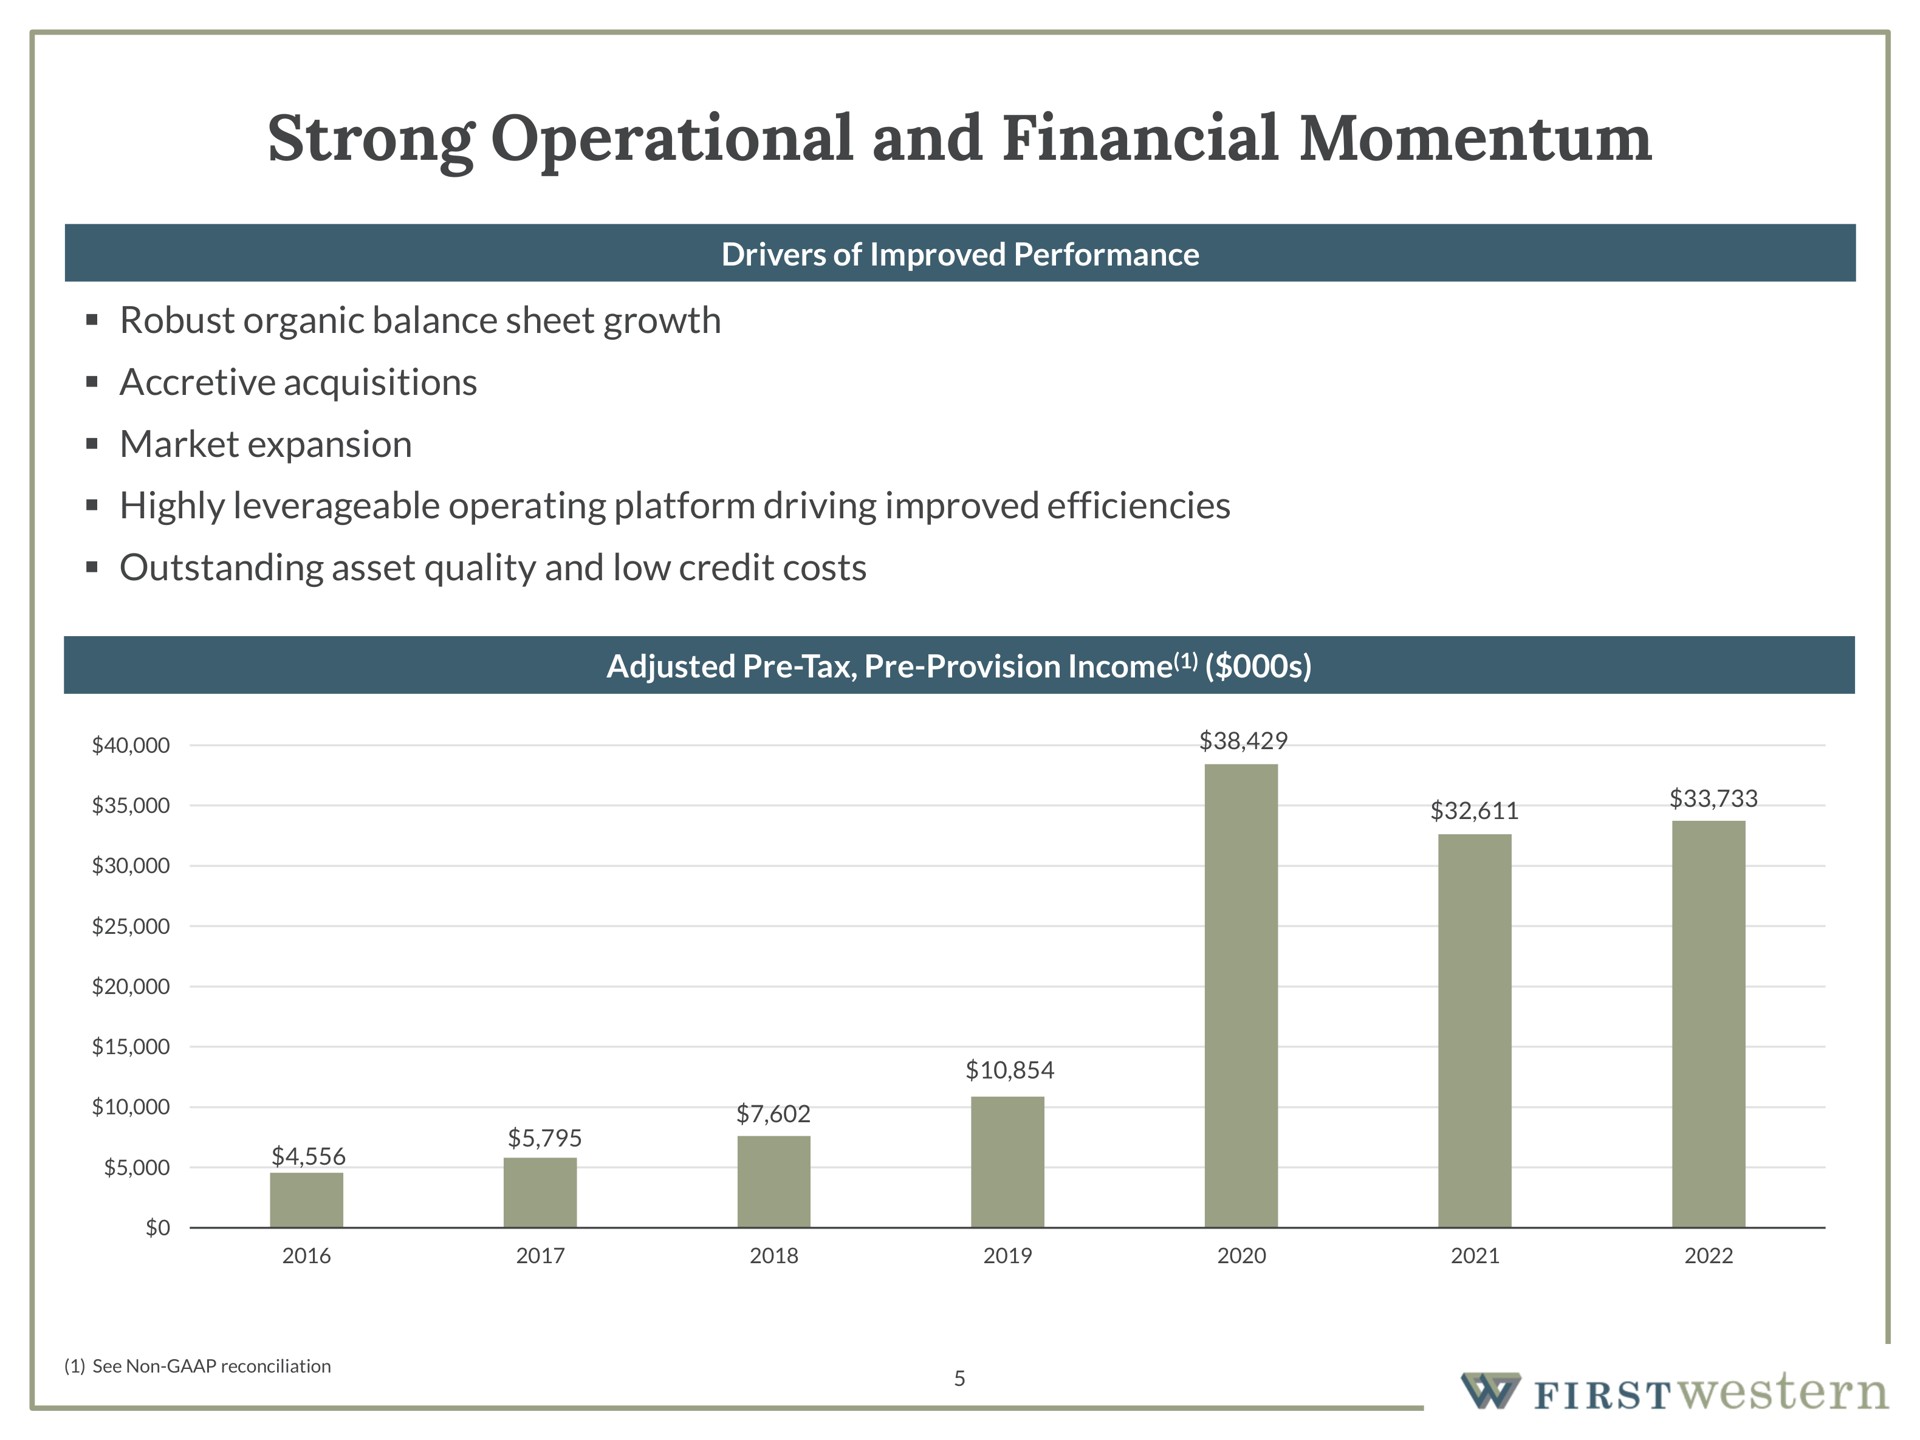 strong operational and financial momentum robust organic balance sheet growth accretive acquisitions market expansion highly operating platform driving improved efficiencies outstanding asset quality and low credit costs | First Western Financial